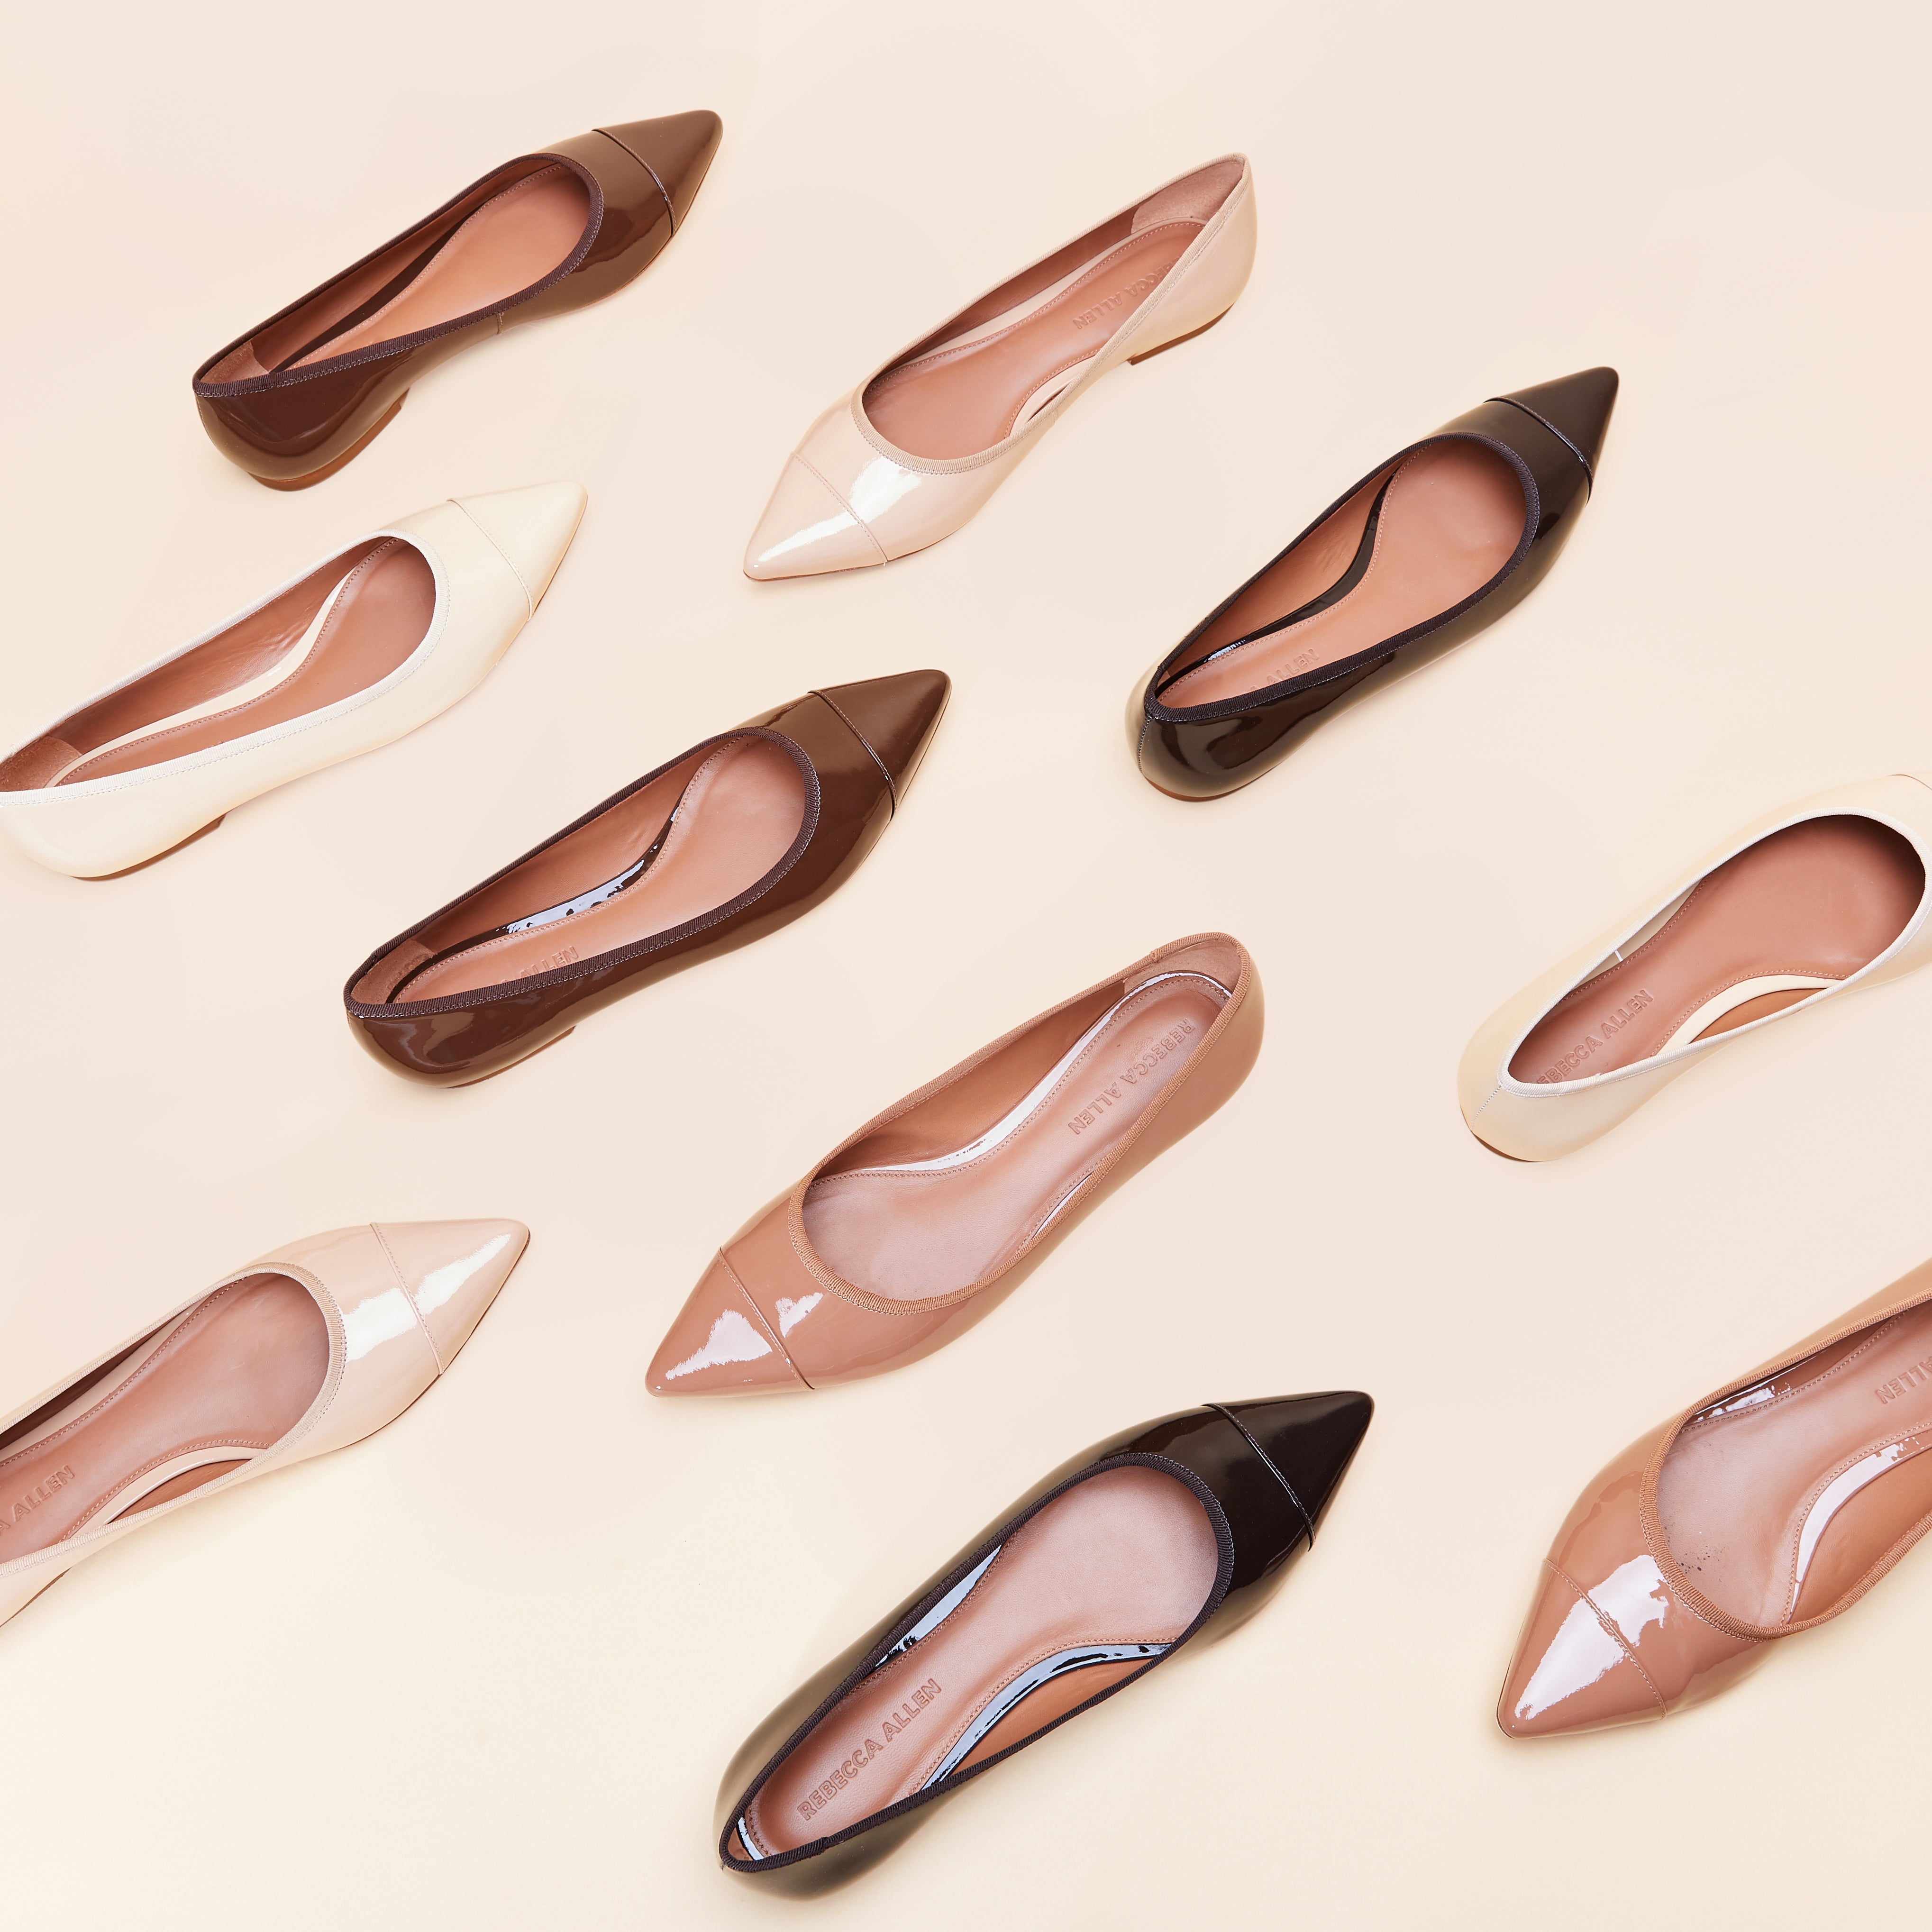 A nude flat for women of color